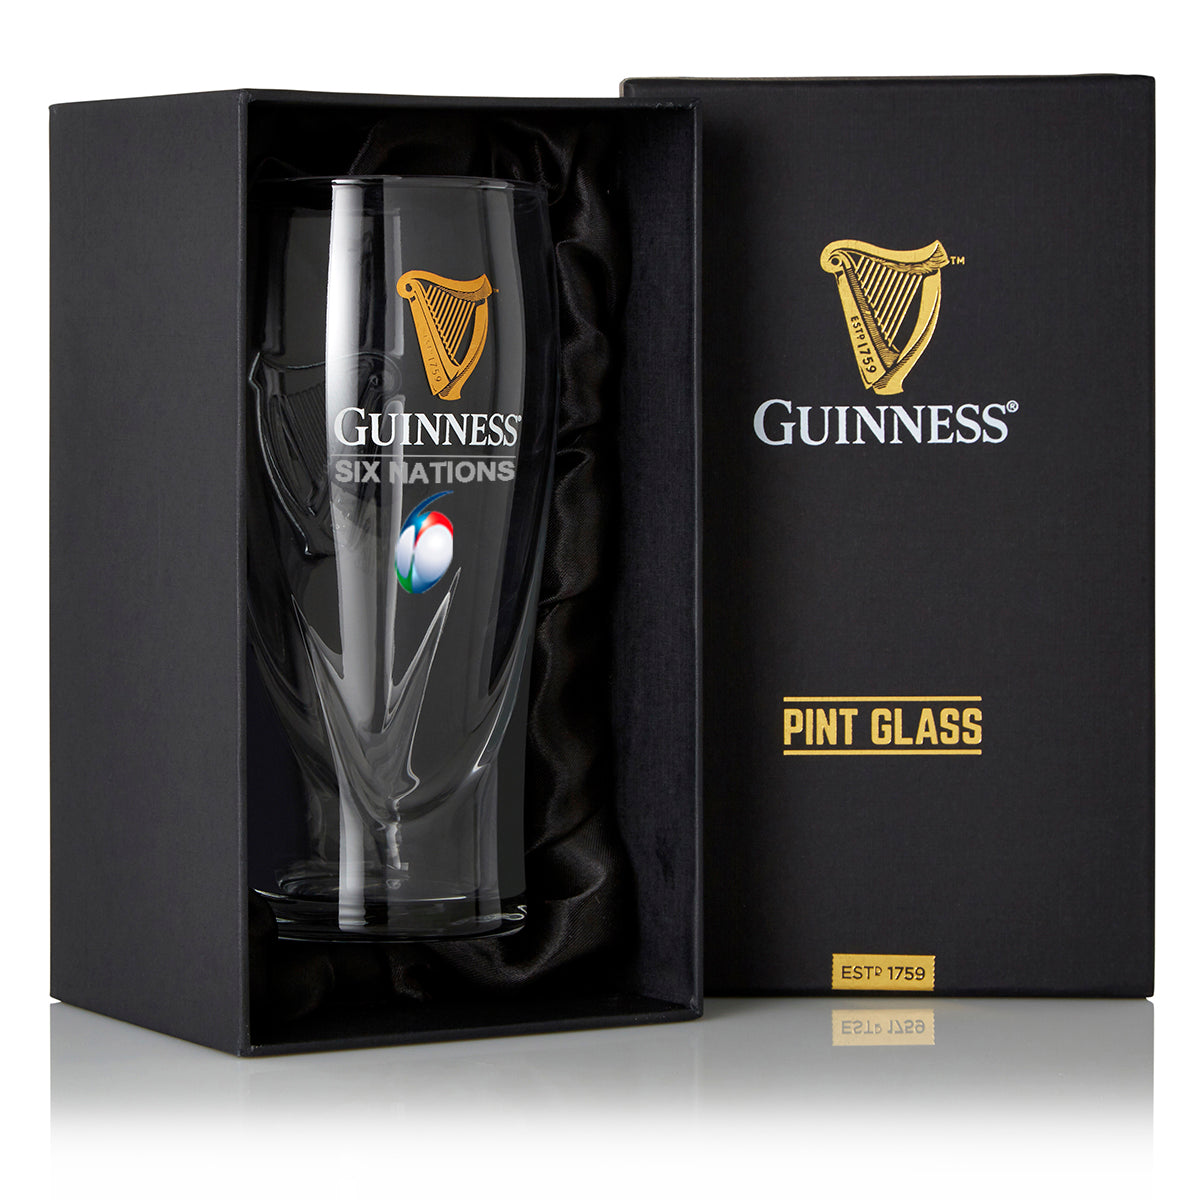 Guinness UK Guinness Six Nations pint glass in a box.